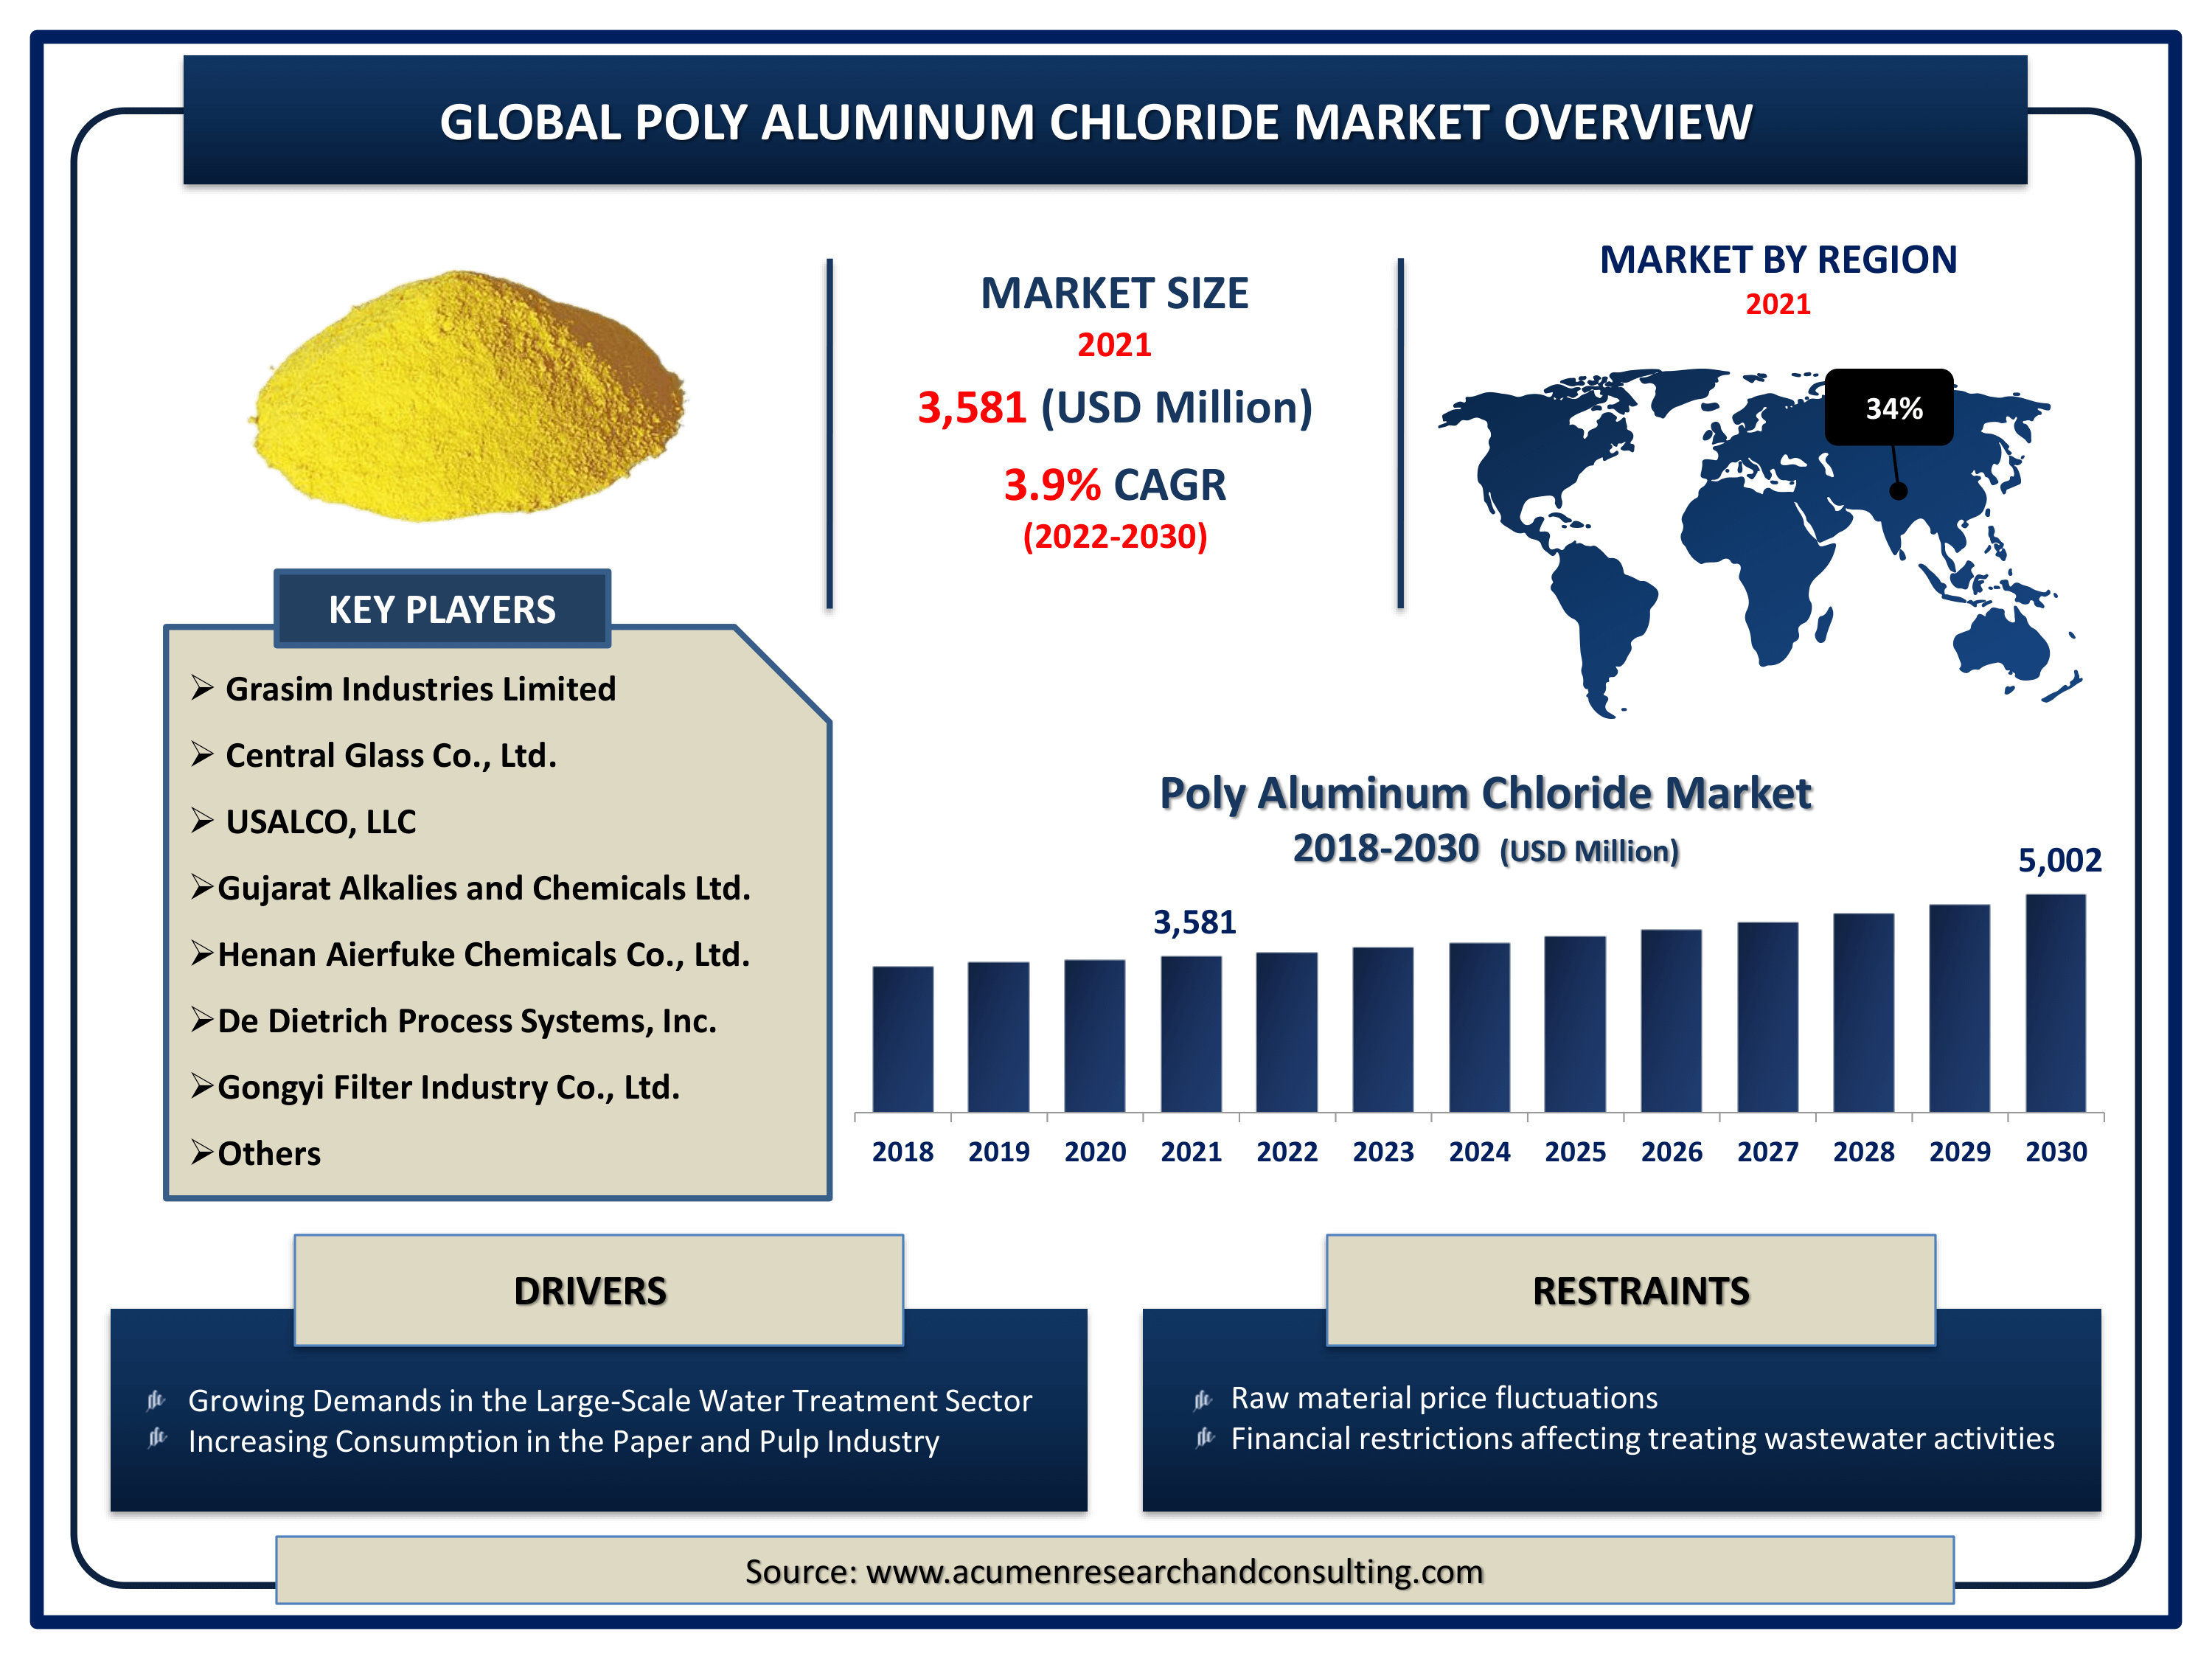 Global poly aluminum chloride market revenue is expected to increase by USD 5,002 million by 2030, with a 3.9% CAGR from 2022 to 2030.